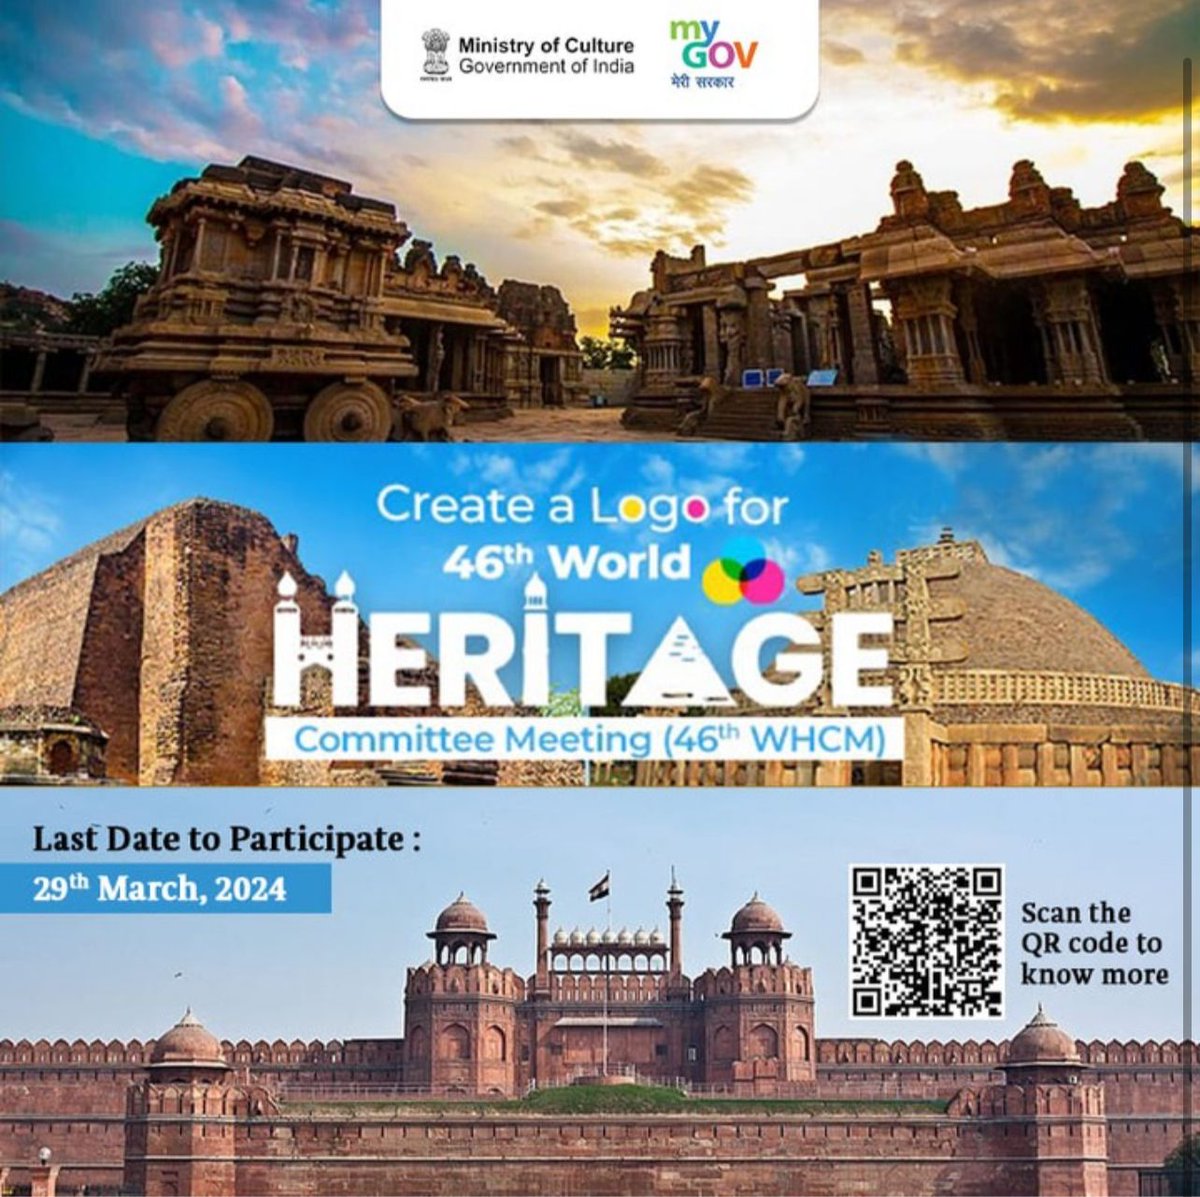 India proudly hosts the 46th World Heritage Committee Meeting in July 2024. Express your creativity to design a logo that captures our incredible built heritage. Don't miss the opportunity to submit your design by March 29, 2024. [Scan the QR code for details] #CultureUnitesAll